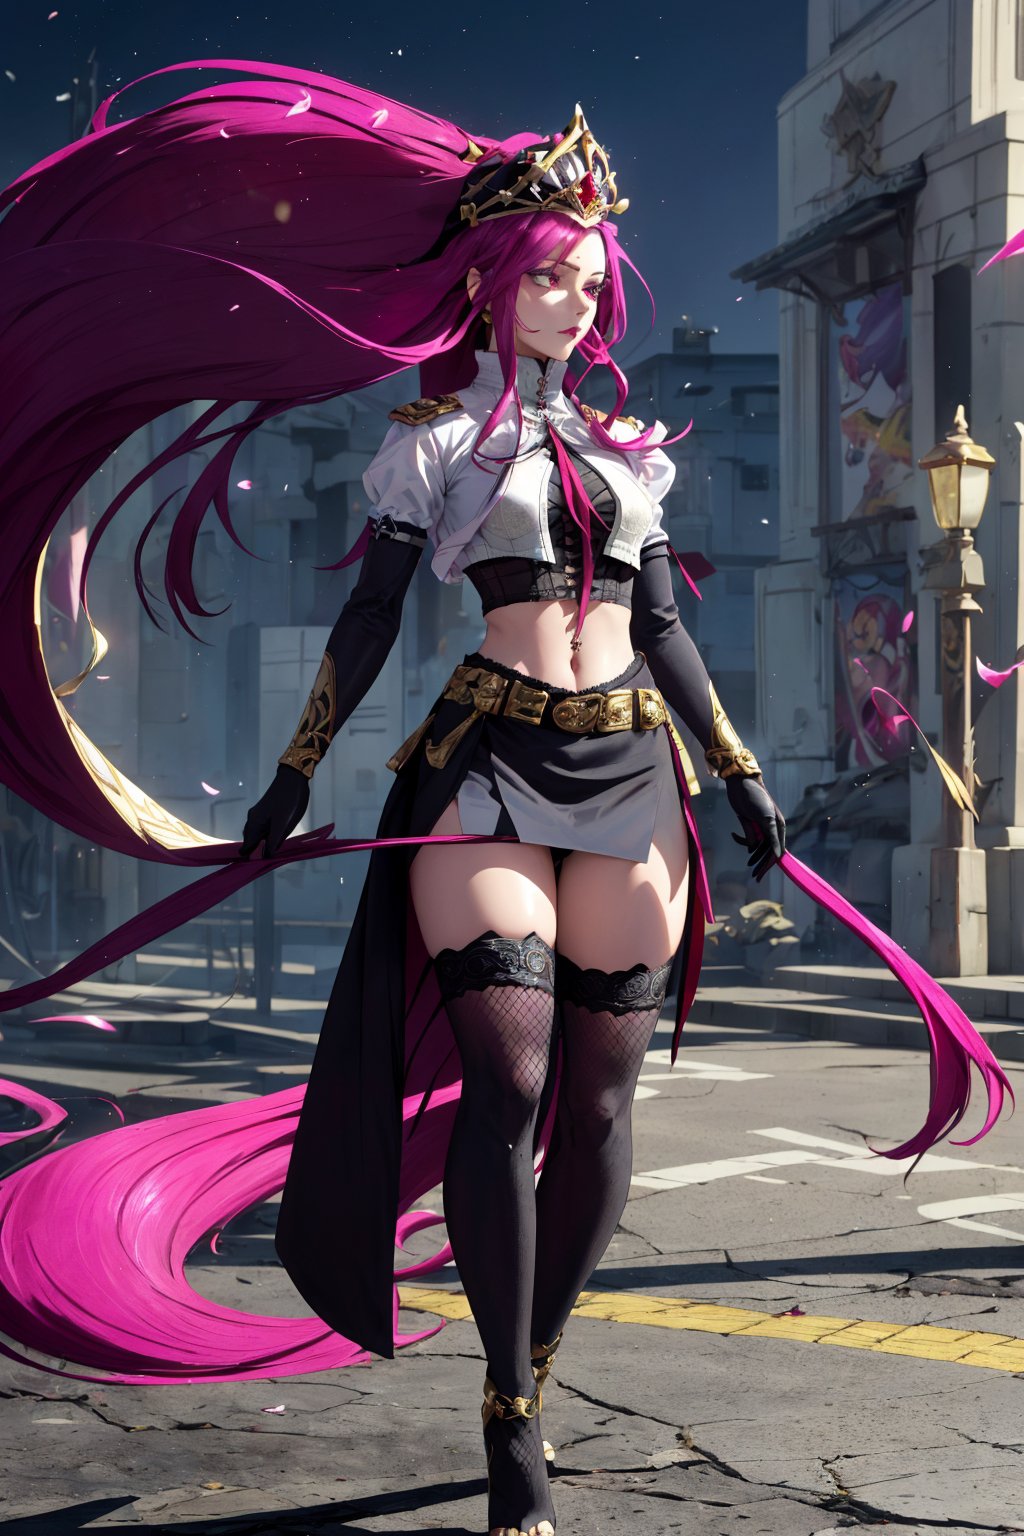 an accurate and detailed full body shot of a young adult female character named Rosaltis, a determined and mysterious aura, (Long flowing magenta hair with pink highlights:1.5), violet-indigo eyes, Seductive makeup, defined lips, (Imperial Veil Crown:1.3), (a white high collar crop top:1.7), (a gothic lace corset underneath crop top:1.4), (Long black opera gloves:1.1), (gold bracers:1.2), (A long black slit-skirt:1.3), Fishnet stockings, Red and gold garter belts, (knee-high Soft-knit wedge heels:1.2), A black belt with various trinkets, Flowing red ribbons, gold accent jewelry, masterpiece, high quality, 4K, rosaria(genshin impact), jessie pokemon, Altair Recreators,hair slicked back<lora:EMS-36230-EMS:0.600000>, <lora:EMS-259677-EMS:0.700000>, <lora:EMS-12256-EMS:0.500000>